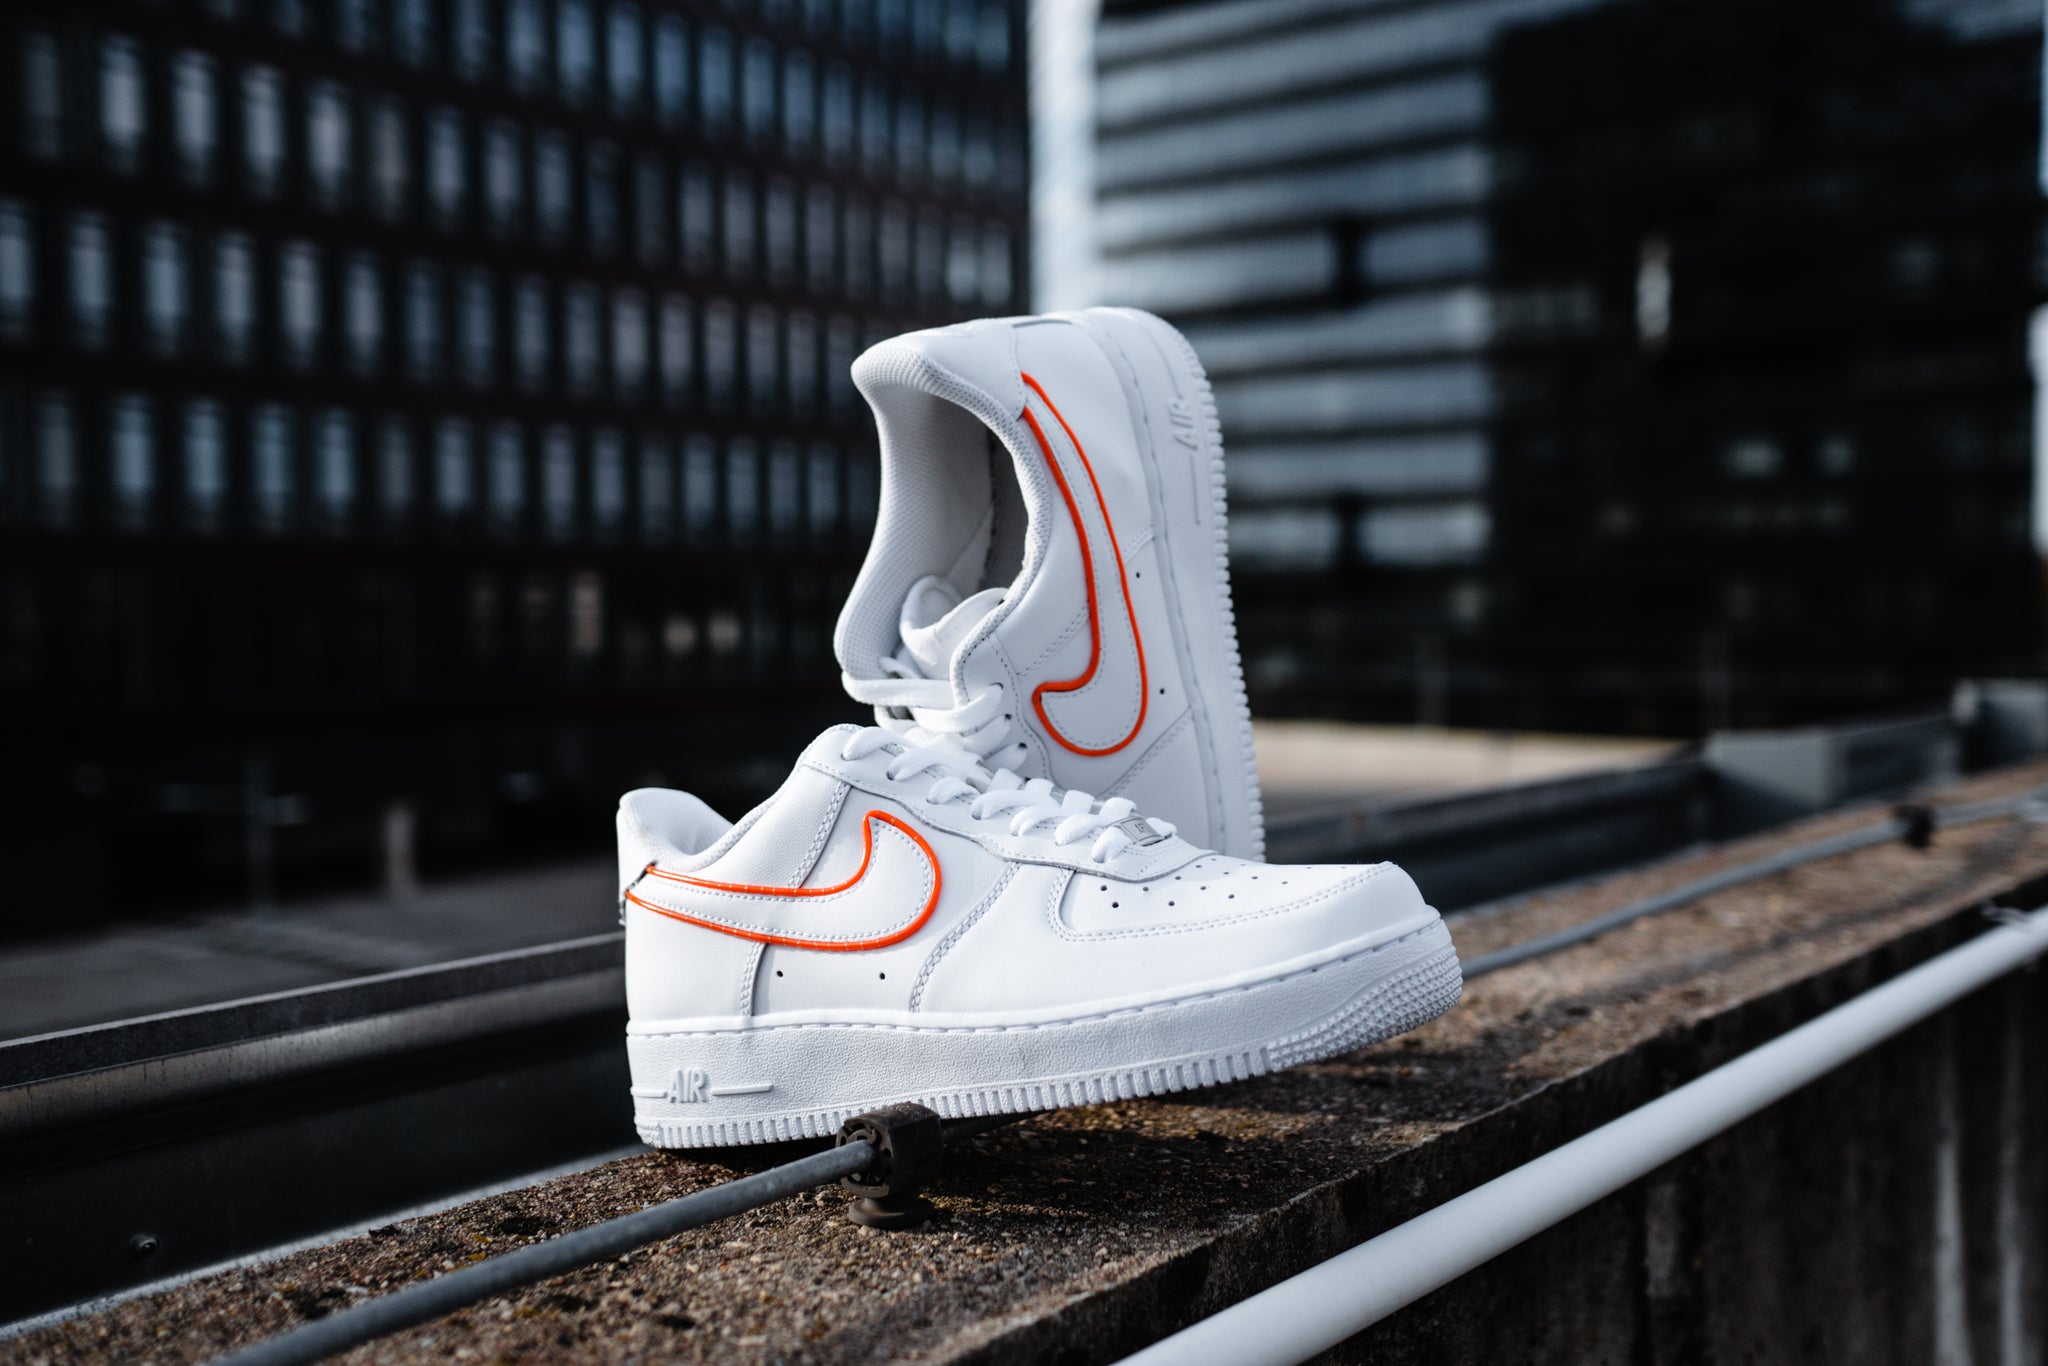 Light Up Nike Air Force 1's '07 RED Womens